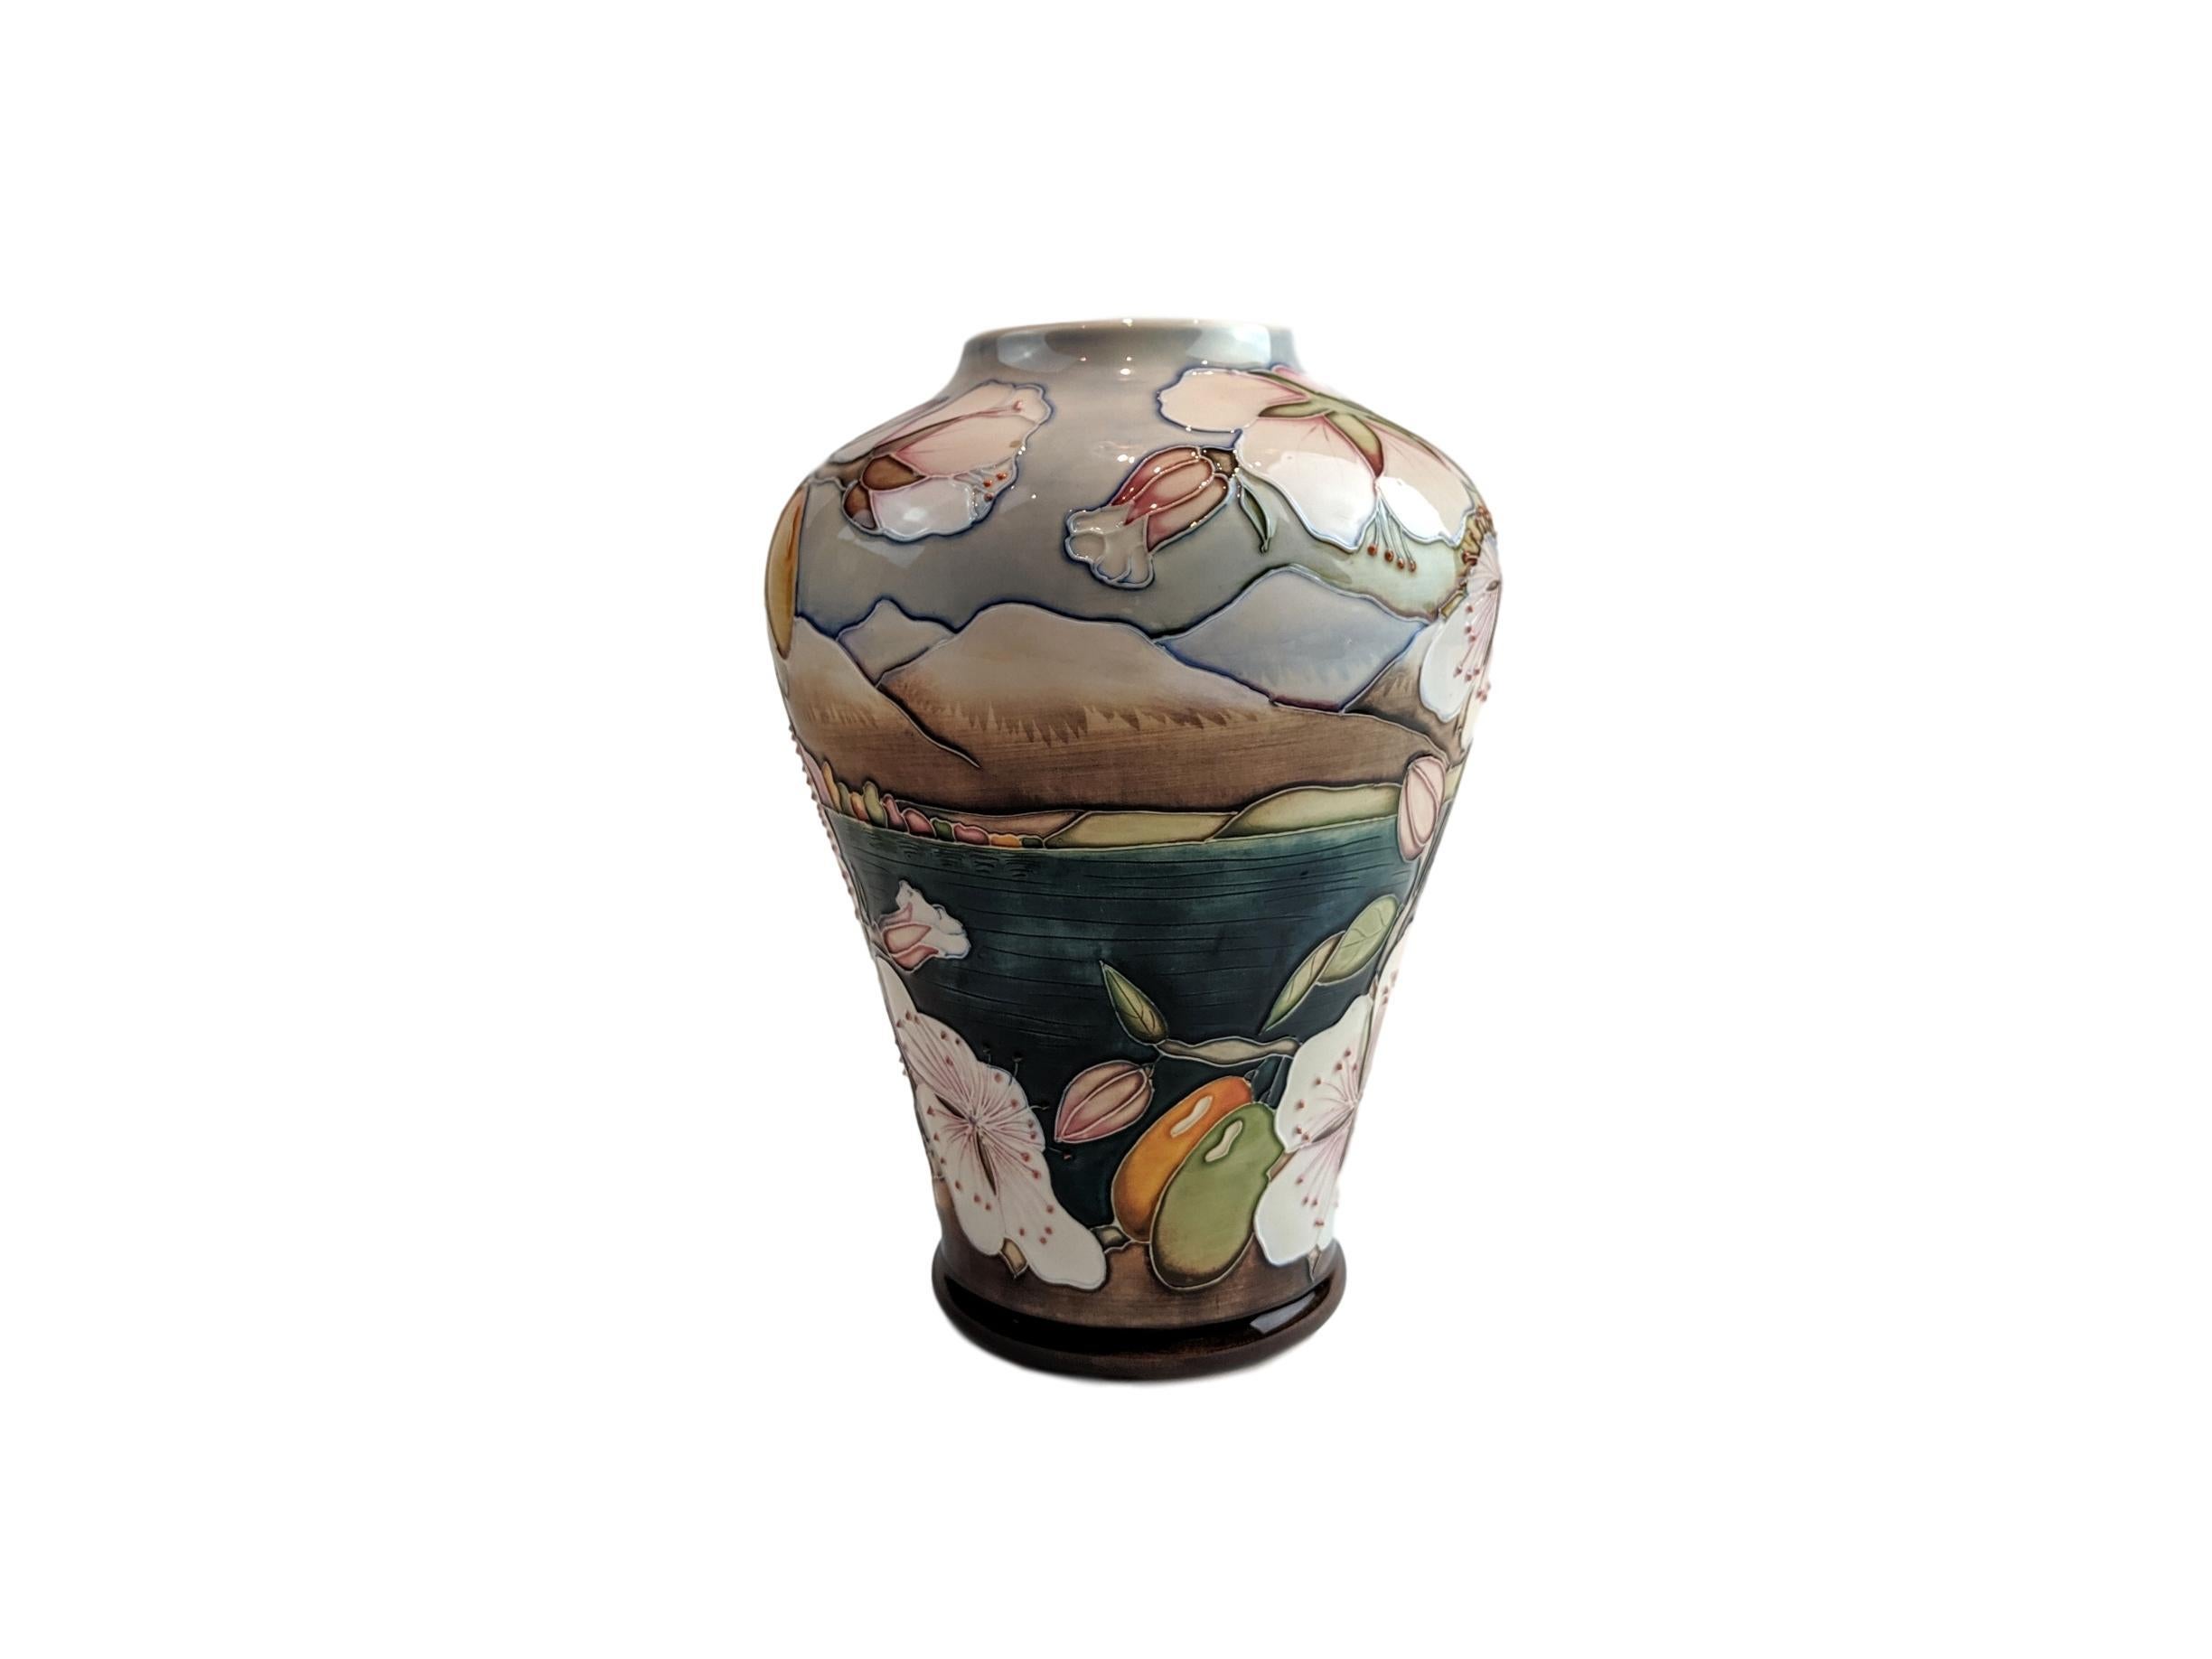 Moorcroft Limited Edition Elounda Vase by Alicia Amison, number 87 of 350. A vase on the 576/9 shape with beautiful colored cherry blossoms with ripening fruit on a lake scene measuring 9